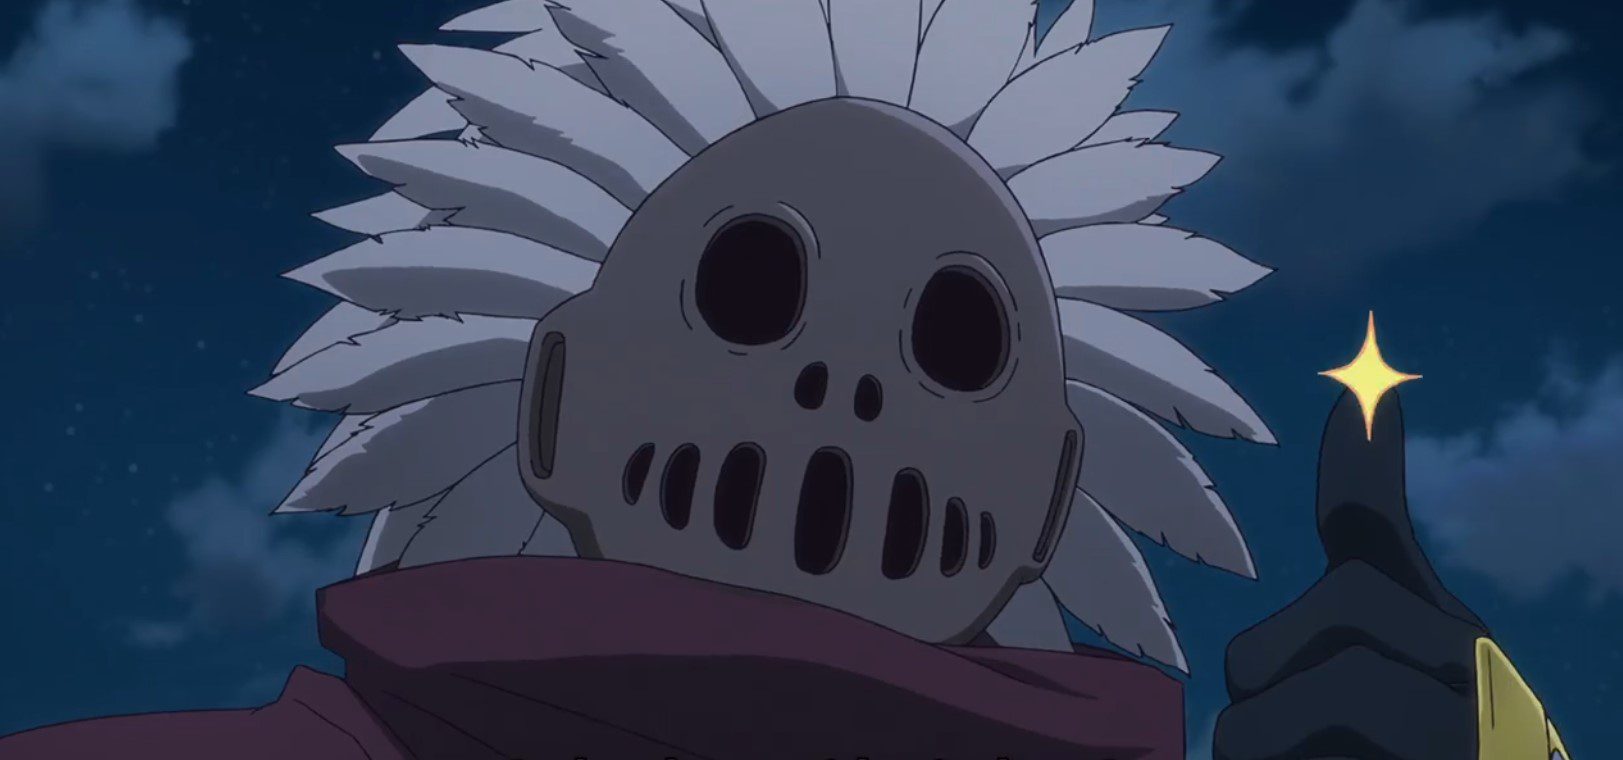 skeleton knight in another world episode 10